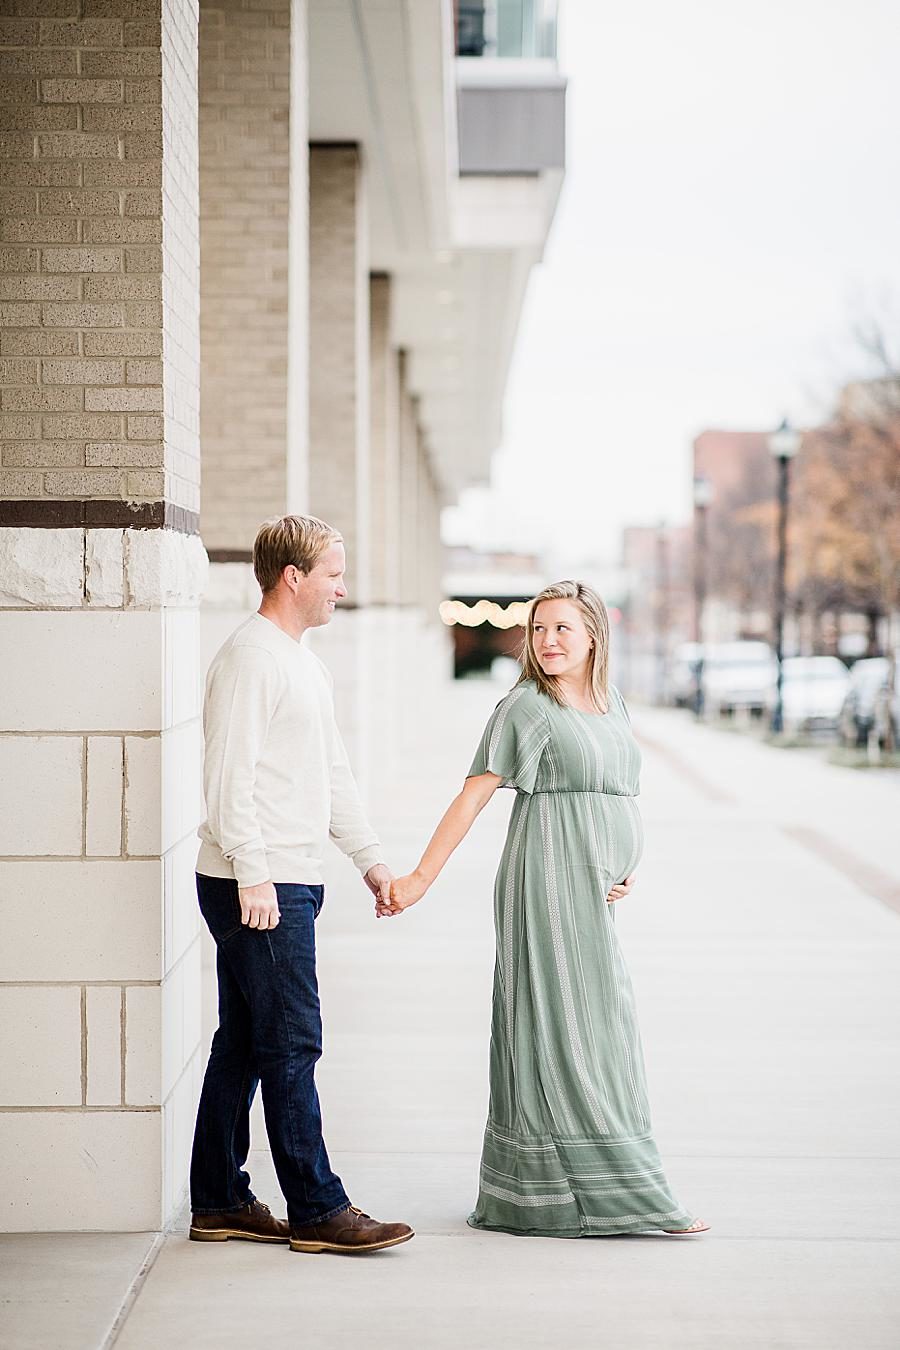 Holding hands at this Downtown Knoxville Maternity by Knoxville Wedding Photographer, Amanda May Photos.